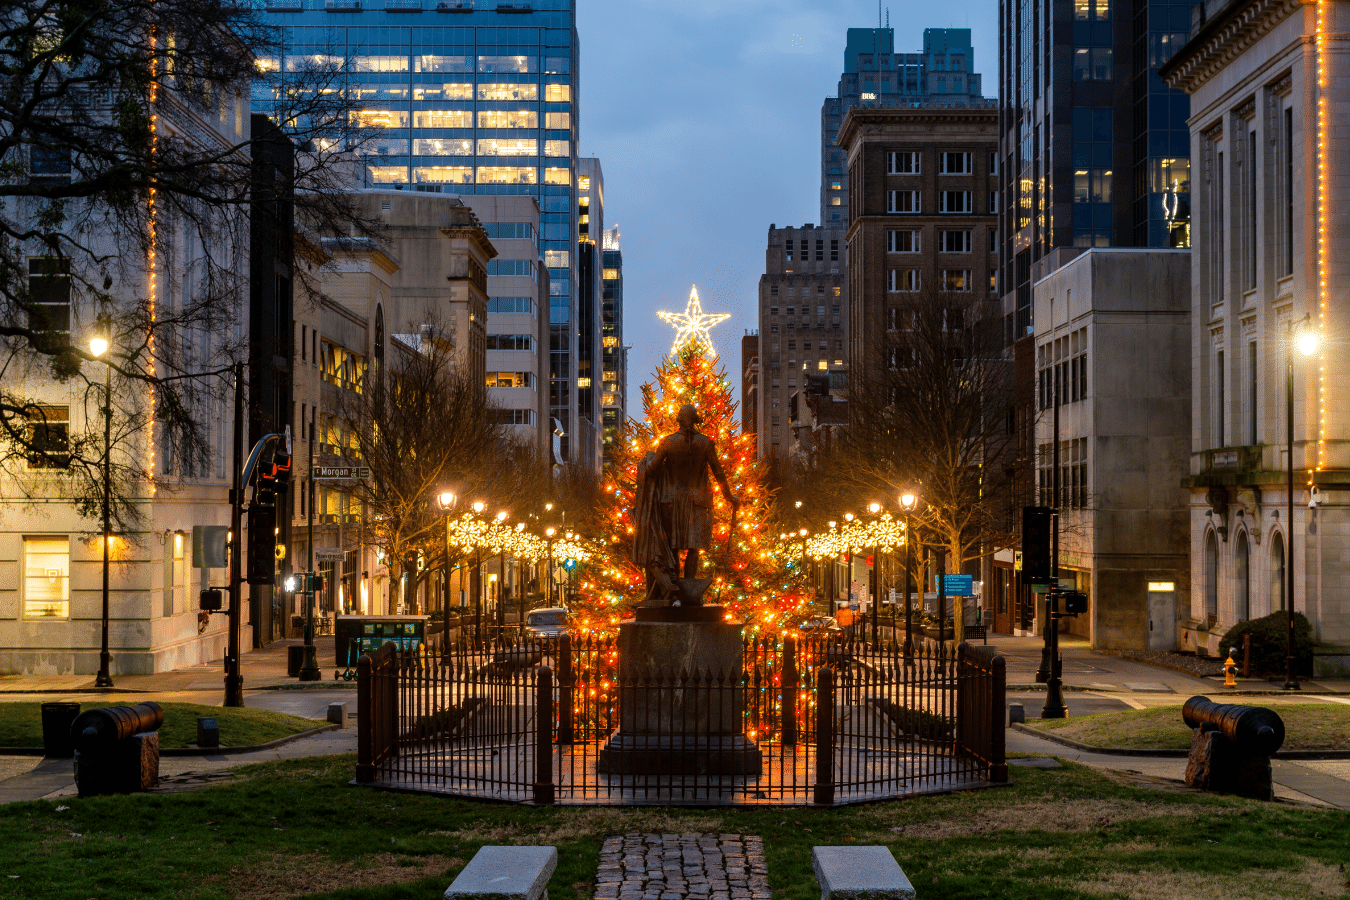 Downtown Raleigh North Carolina Statue in front of capitol building with christmas tree and lights